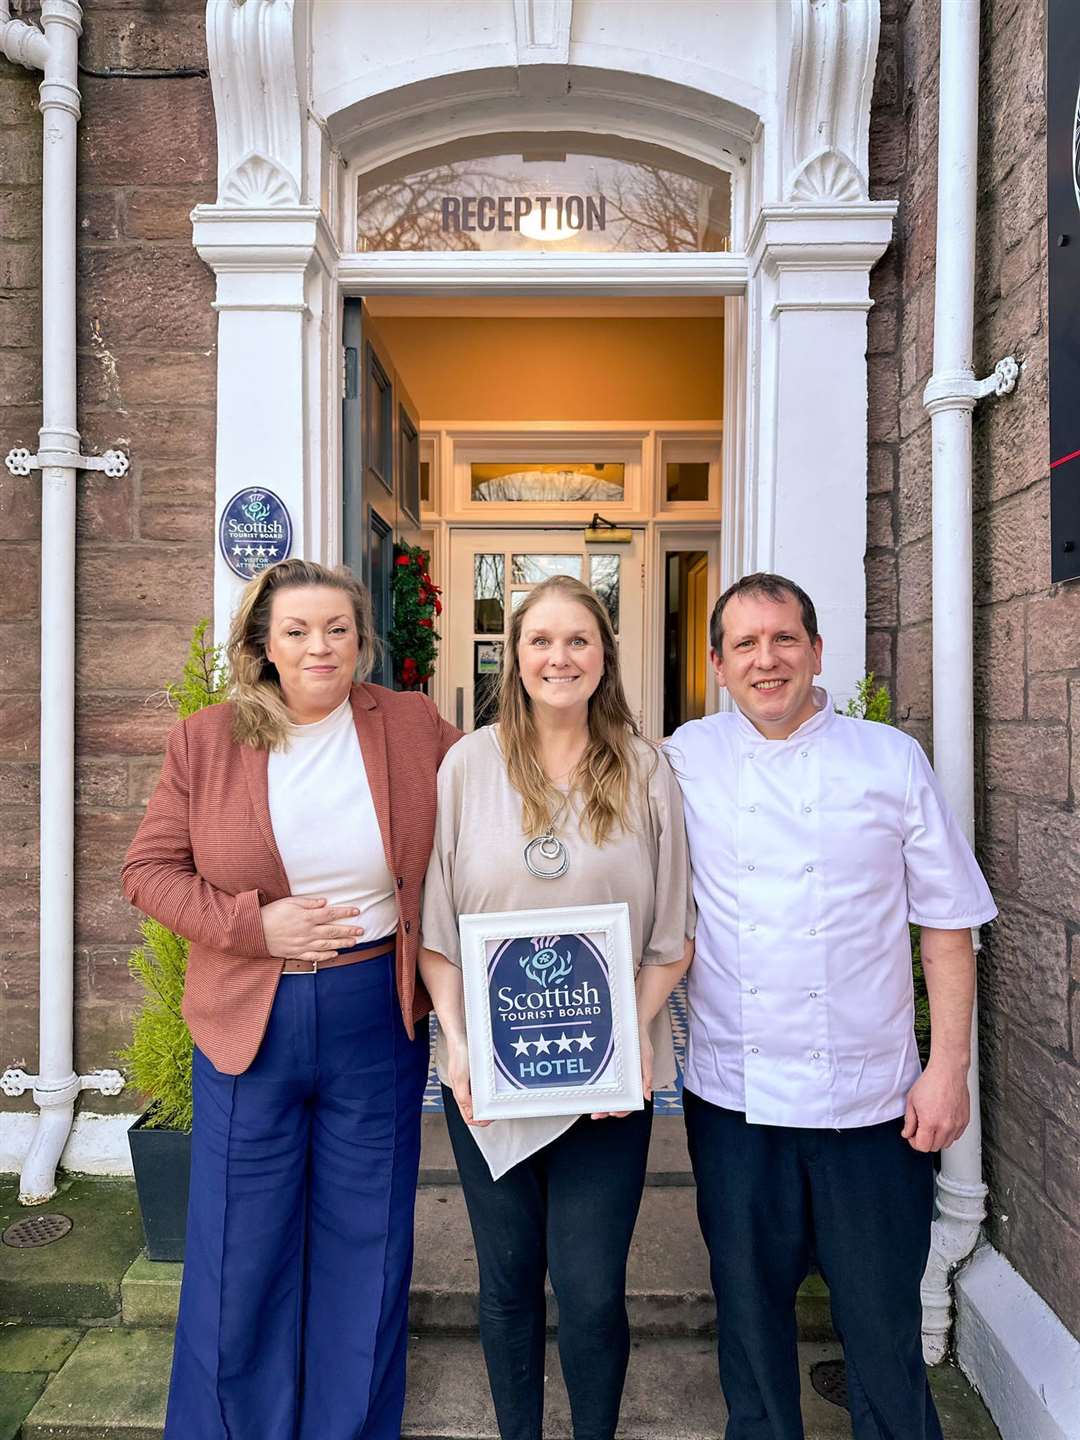 Glen Mhor Hotel owner Victoria Erasmus (centre) celebrates the 4 Star rating with Operations Manager, Deirdre Lee (left) and Executive Chef, Andrew Lee (right).